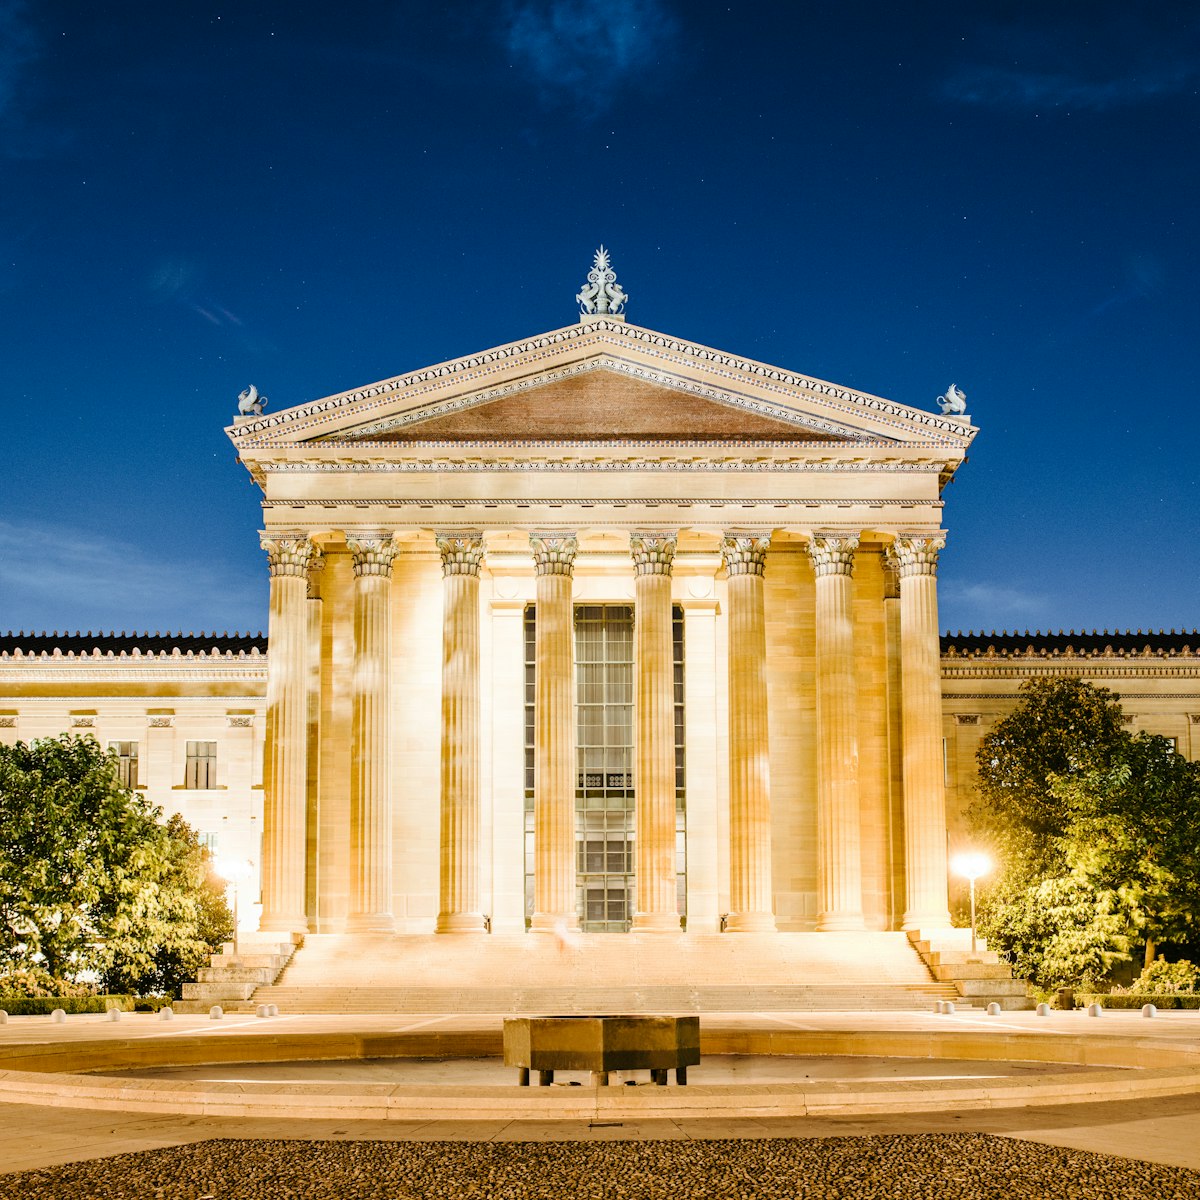 Exterior of the Philadelphia Art Museum entrance at night.
181142415
Square, Clear Sky, Architectural Feature, Philadelphia Museum of Art, Night, Dusk, Travel locations, Sky, Art Museum, Star - Space, Building Exterior, Museum, Famous Place, Architectural Column, Architecture, Philadelphia - Pennsylvania, Outdoors, No People, Photography, Star, Pennsylvania, Philadelphia, North America, Greek Culture, Neo-Classical, Column, Built Structure, USA